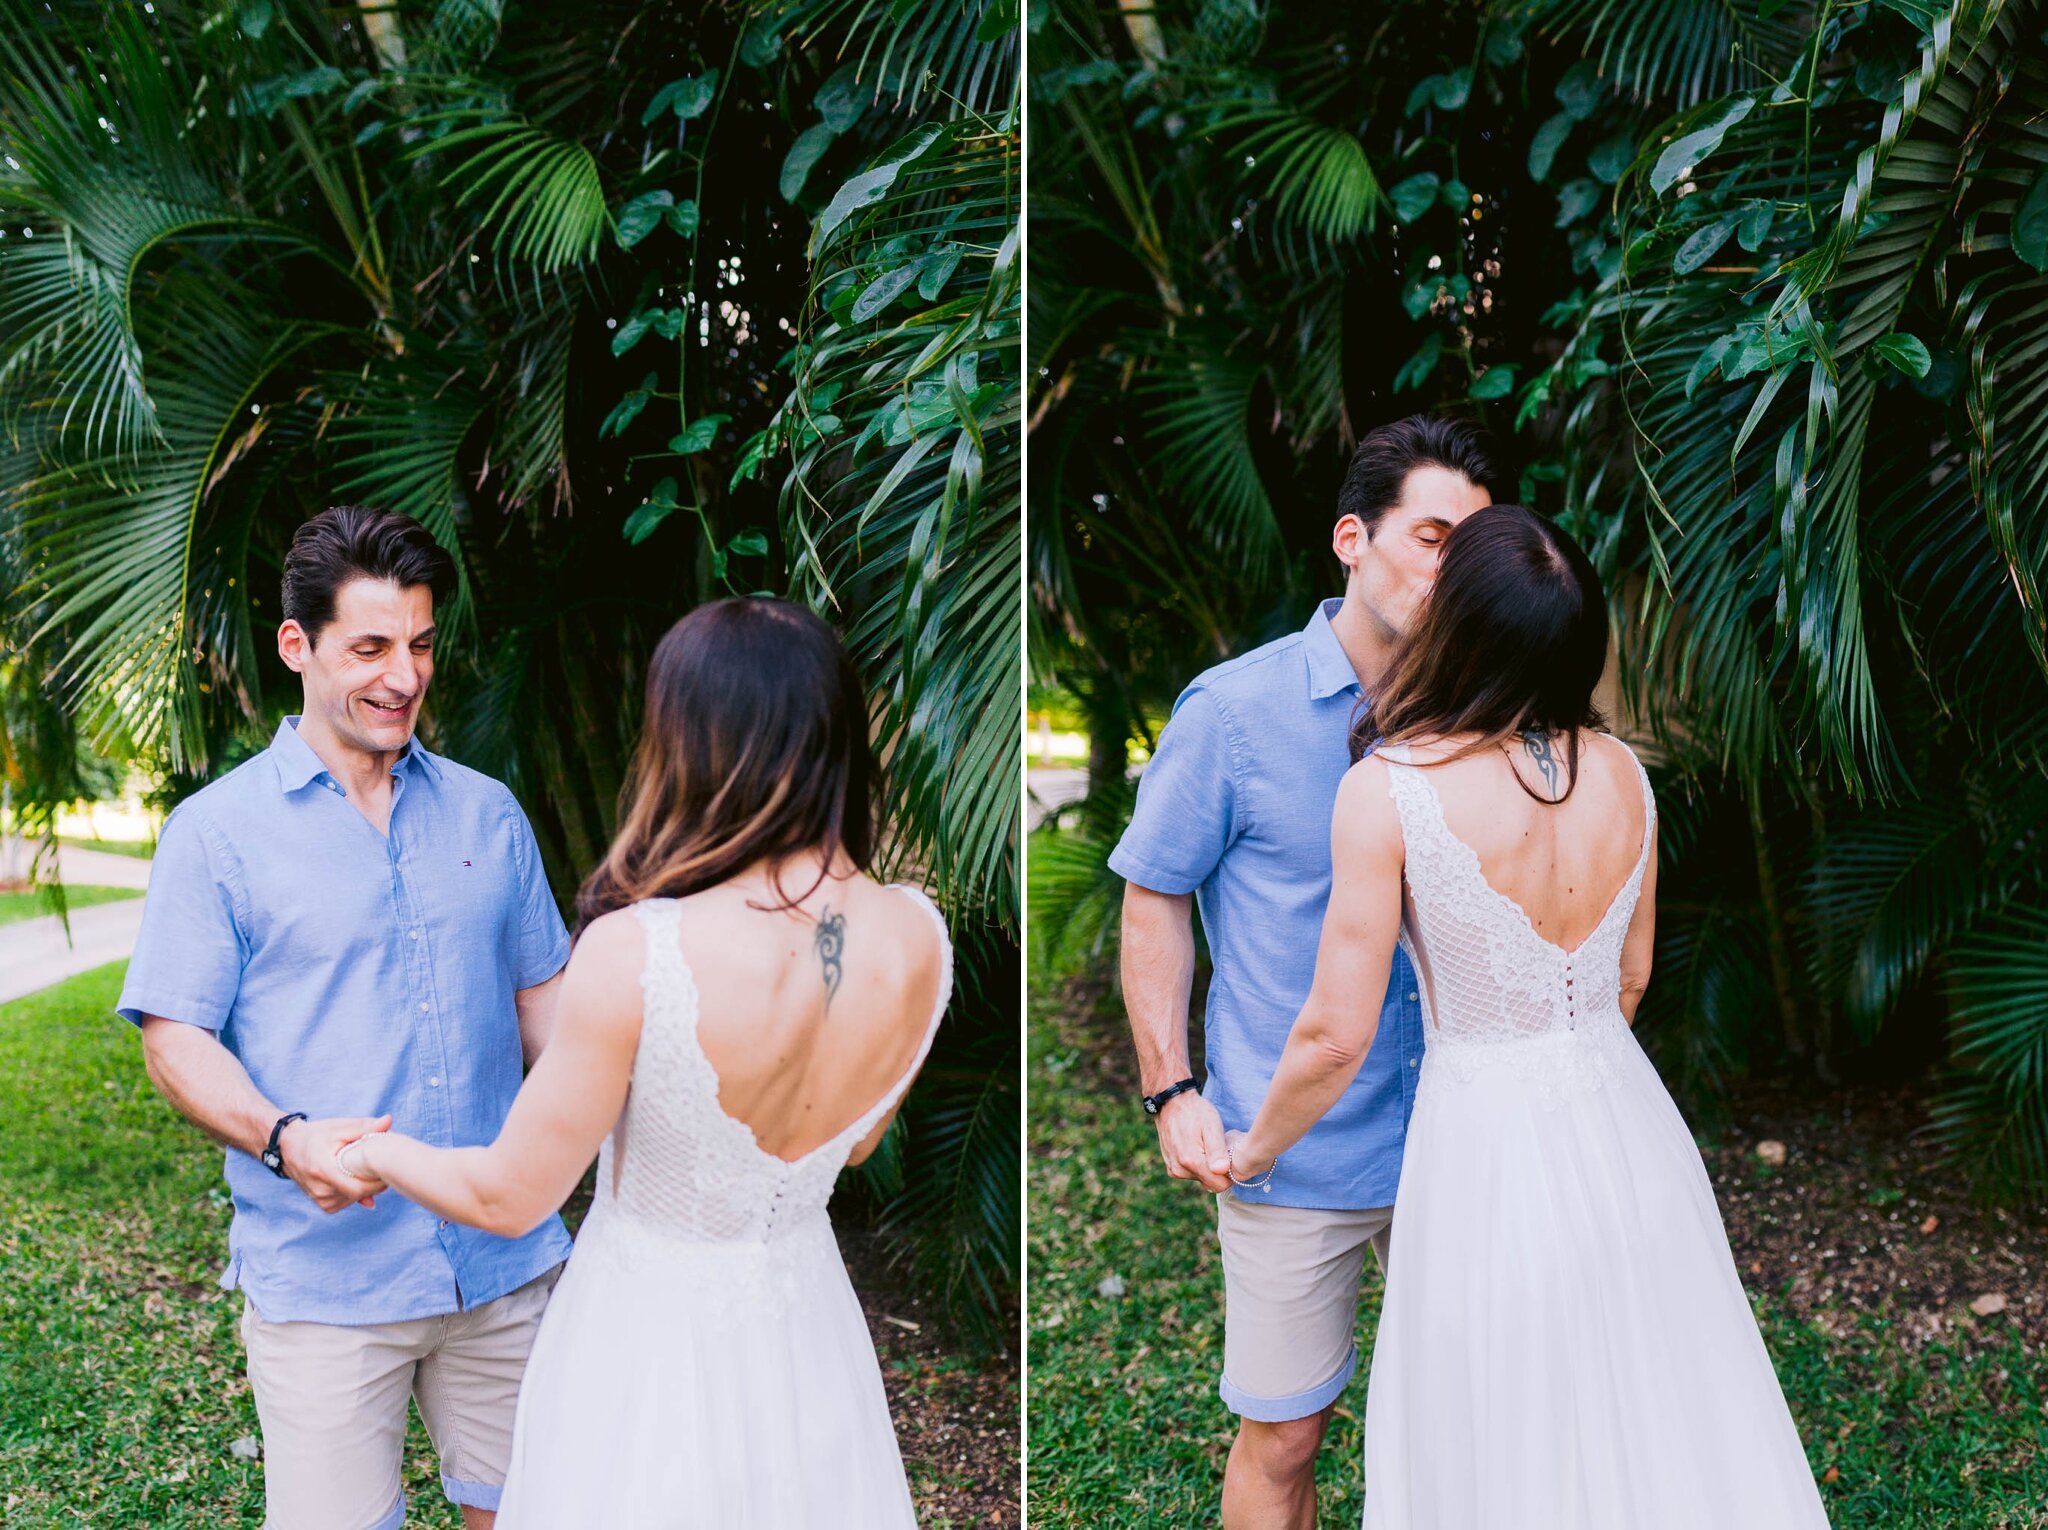 First look between bride and groom  at the Aston Maui Banyan for their Elopement at Secret Cove Beach - Maui Wedding Photographer